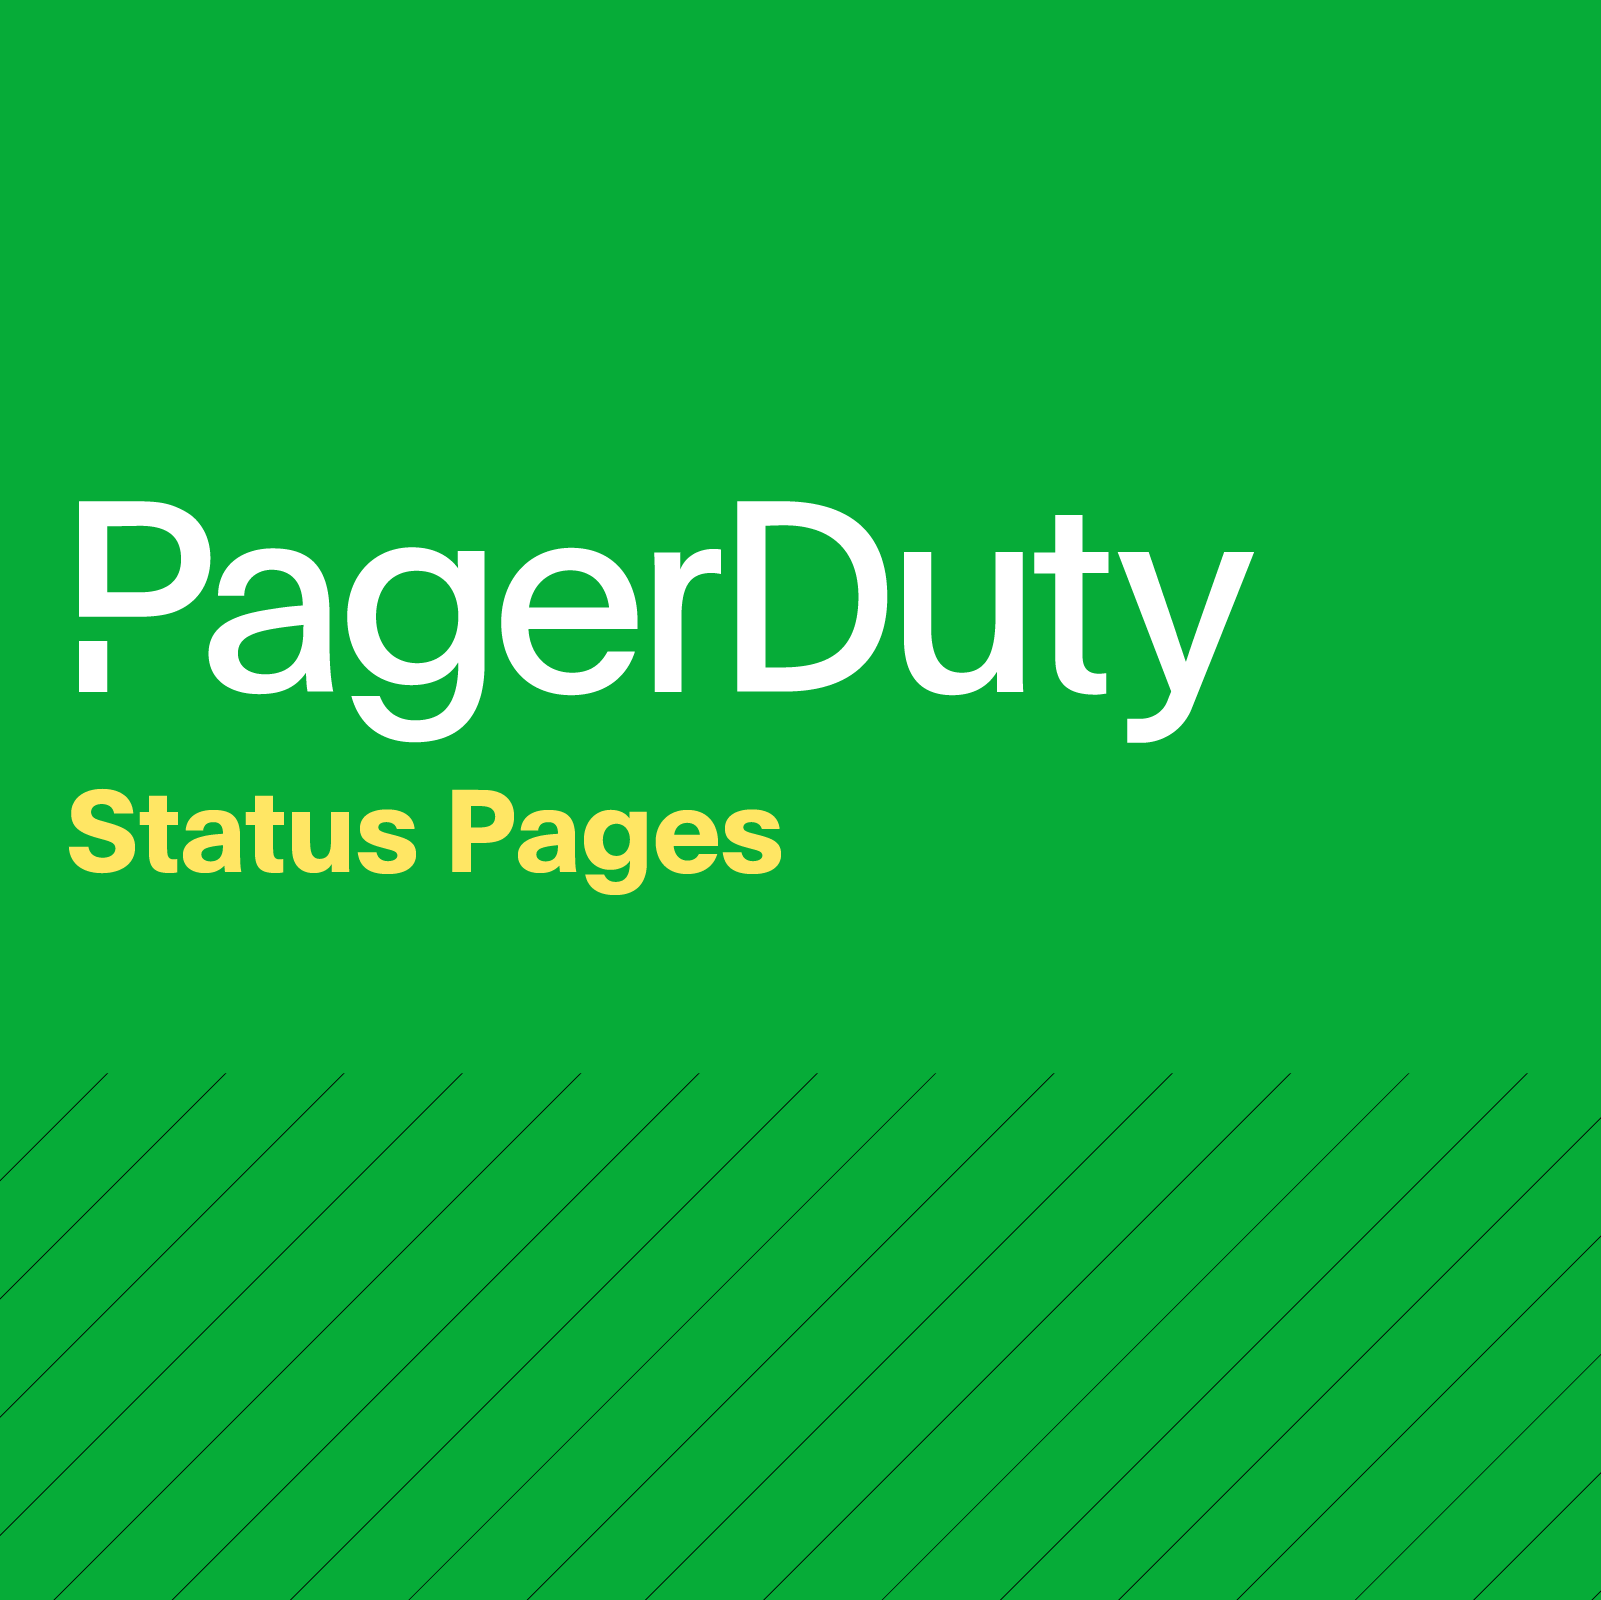 PagerDuty logo in white on green square background with yellow text that reads, 